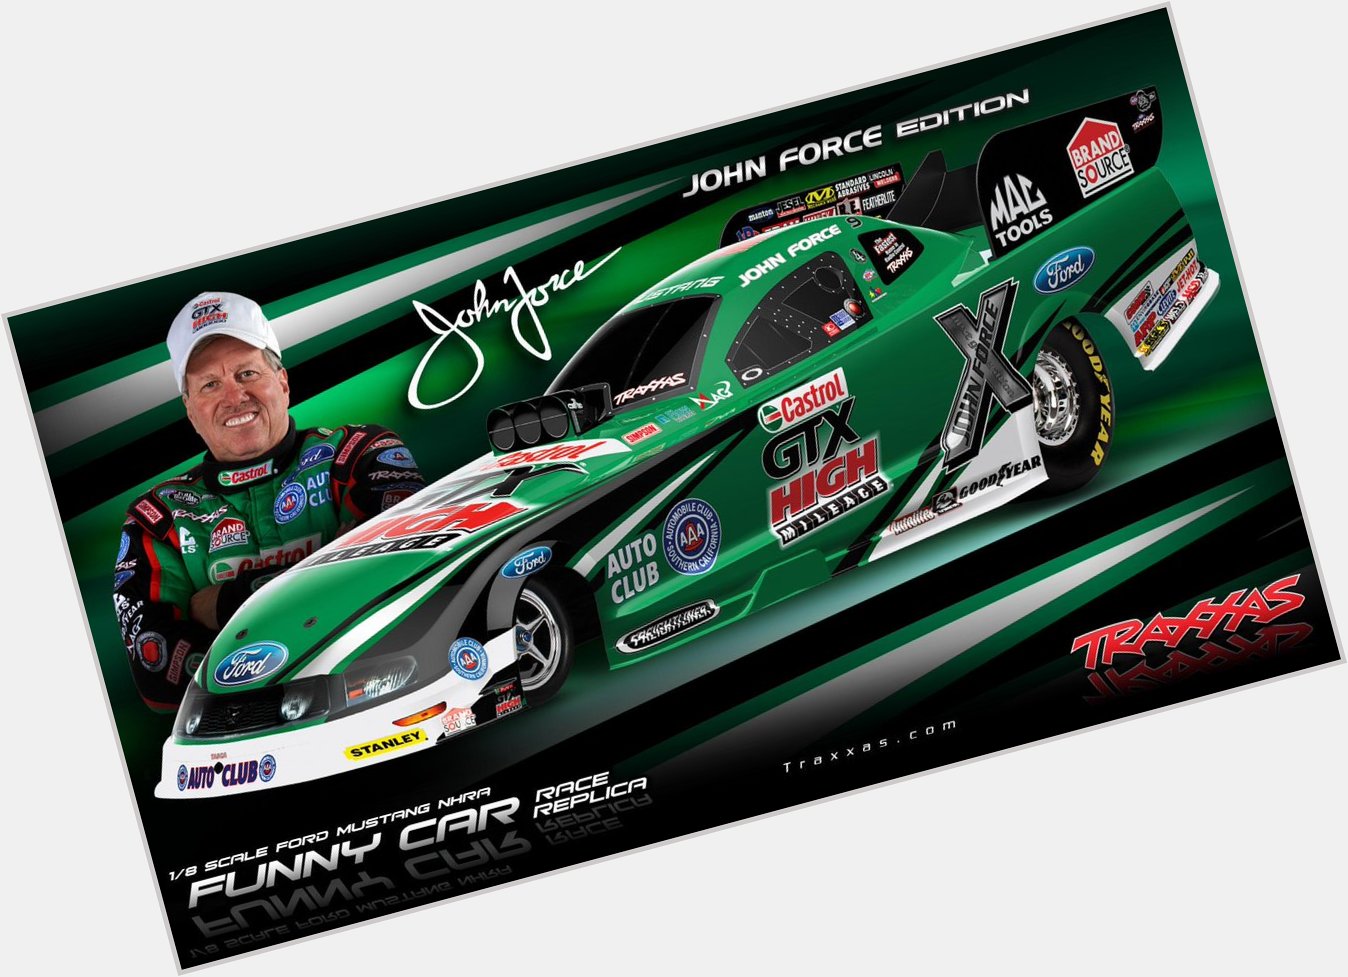 Happy Birthday to John Force, who turns 66 today! 